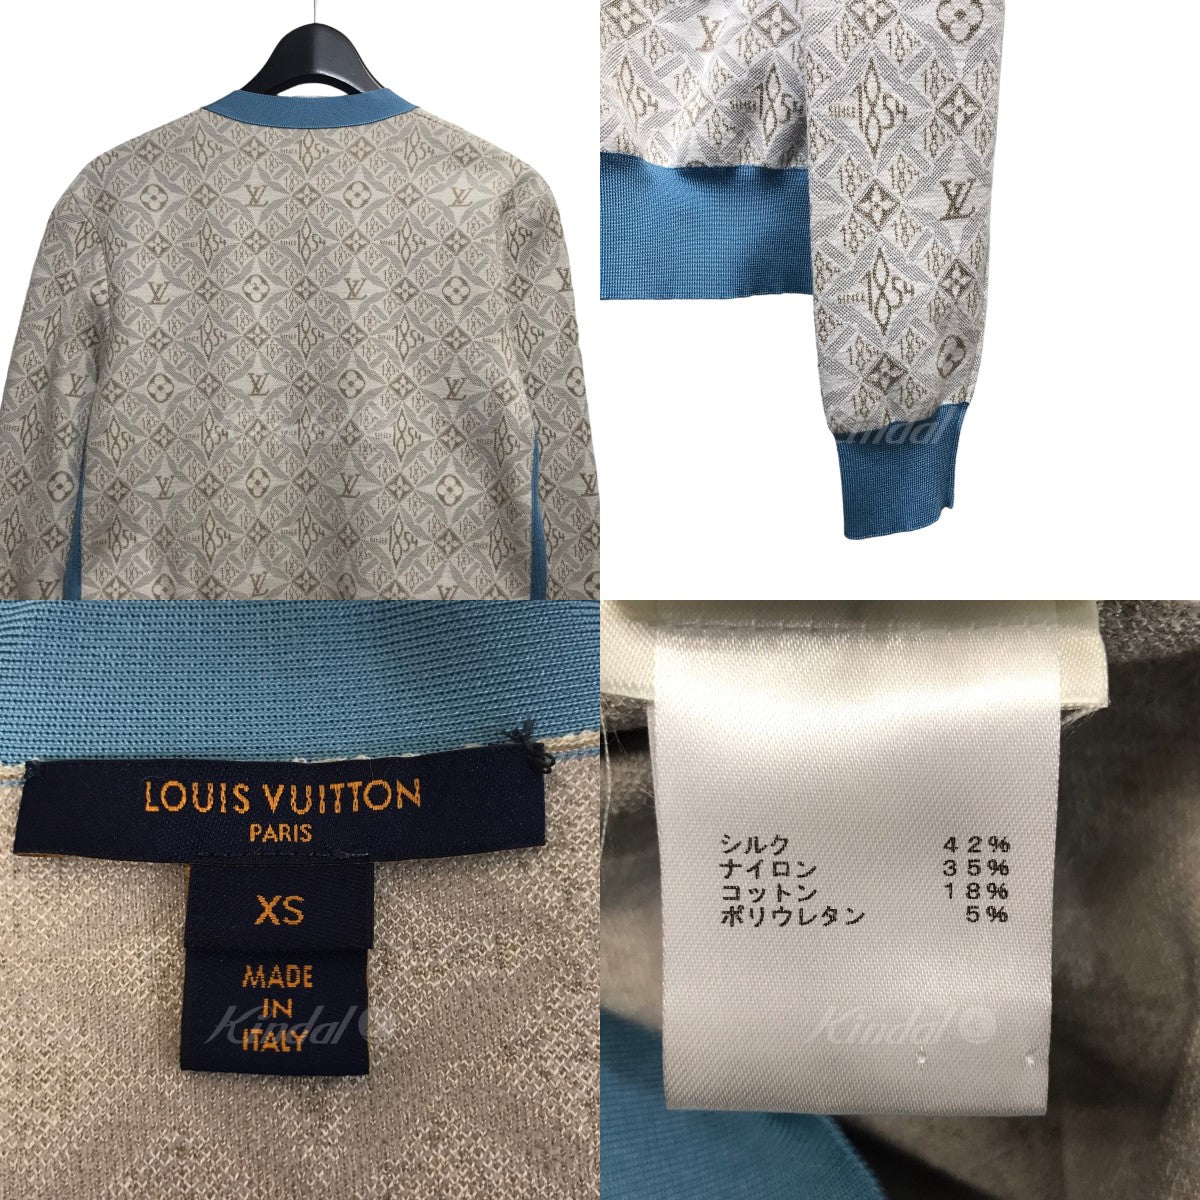 LOUIS VUITTON(ルイヴィトン) 22SS「Since 1854 Contrast Trim Cardigan」カーディガン